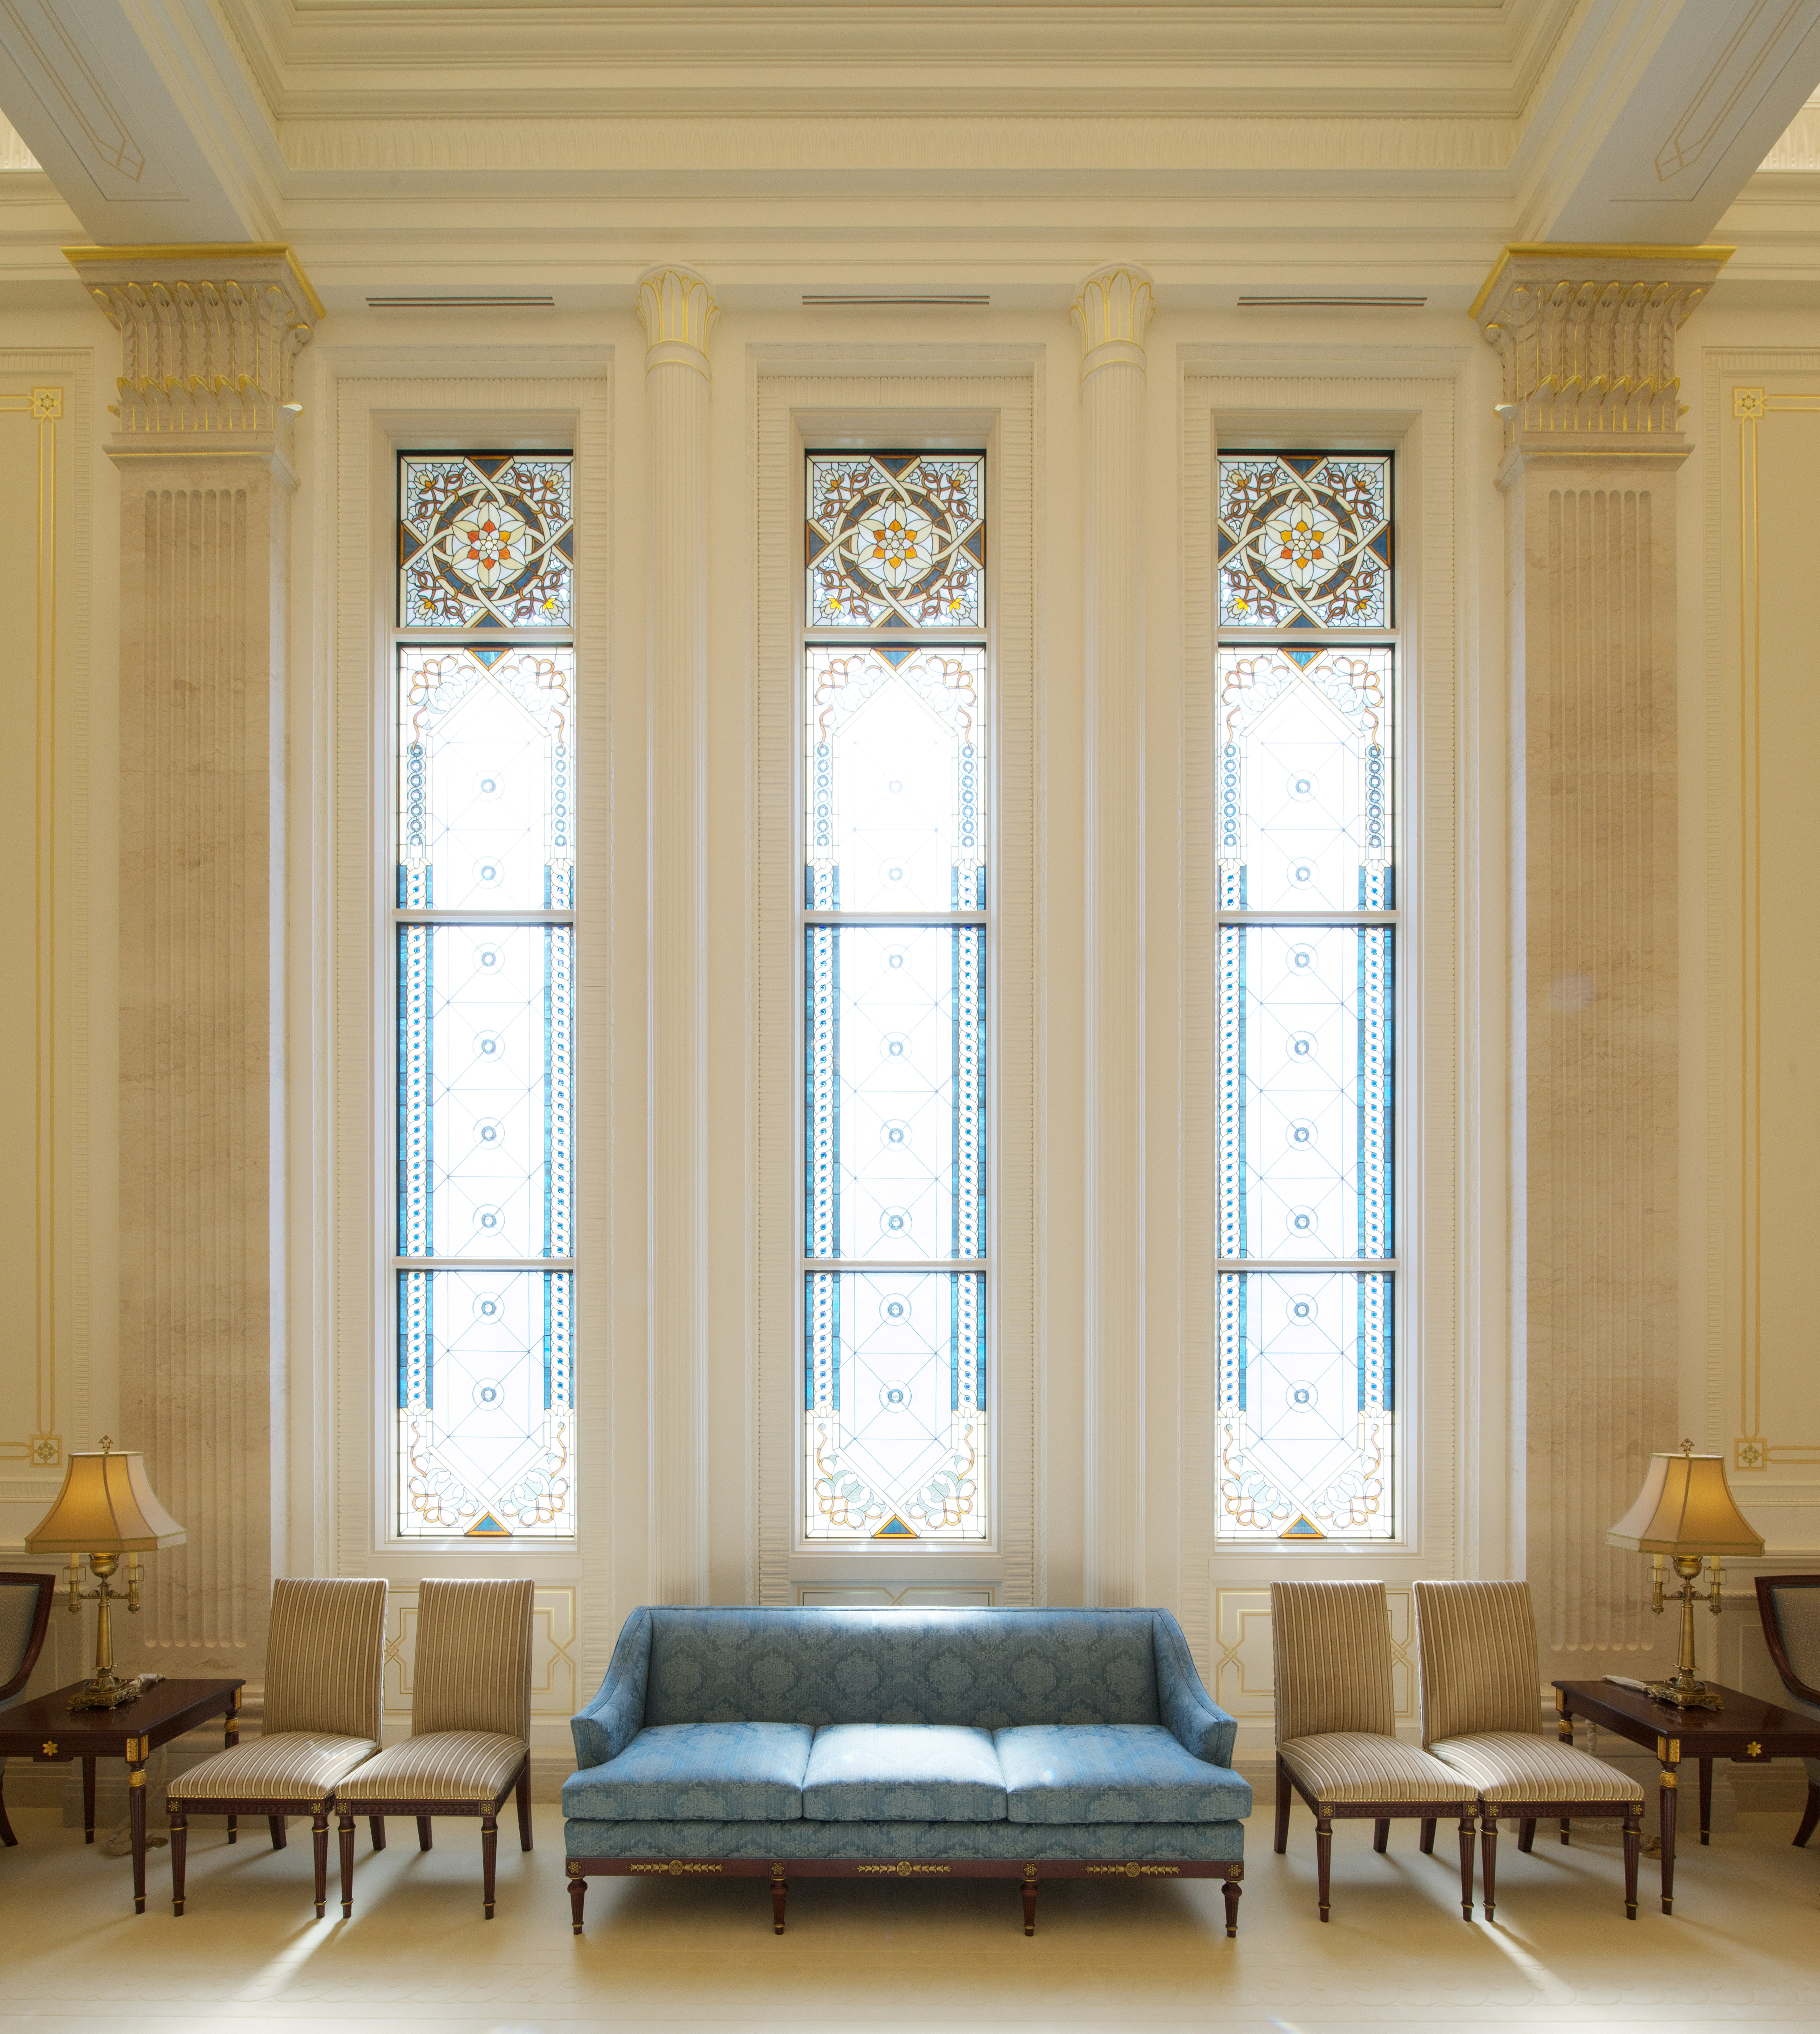 Indianapolis_Temple_Celestial_Room2_2015.jpg